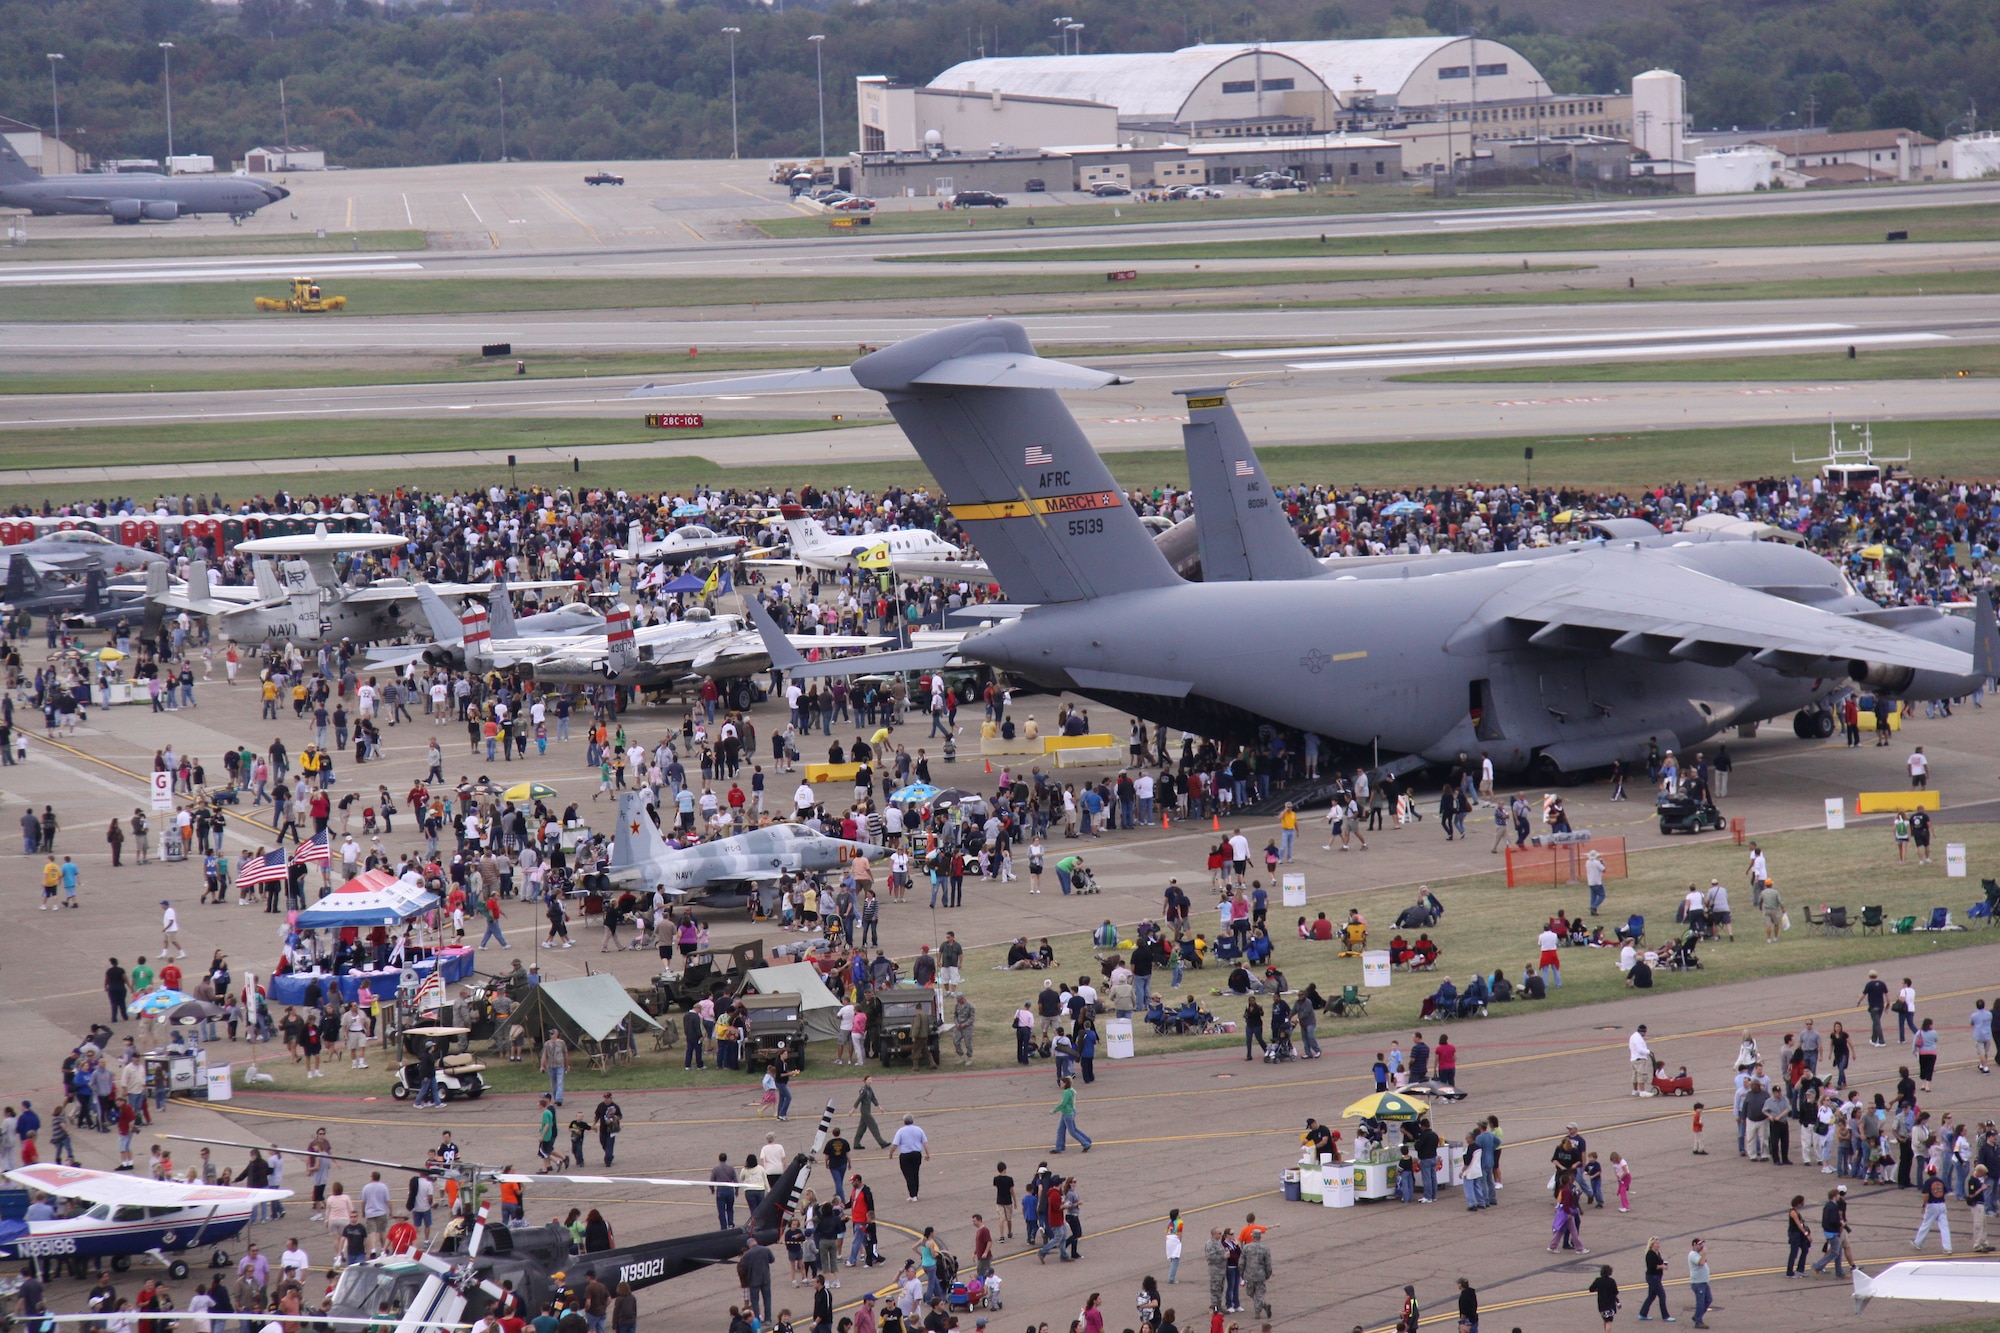 The Wings Over Pittsburgh air show hosts record crowds
September 11 & 12, 2010.